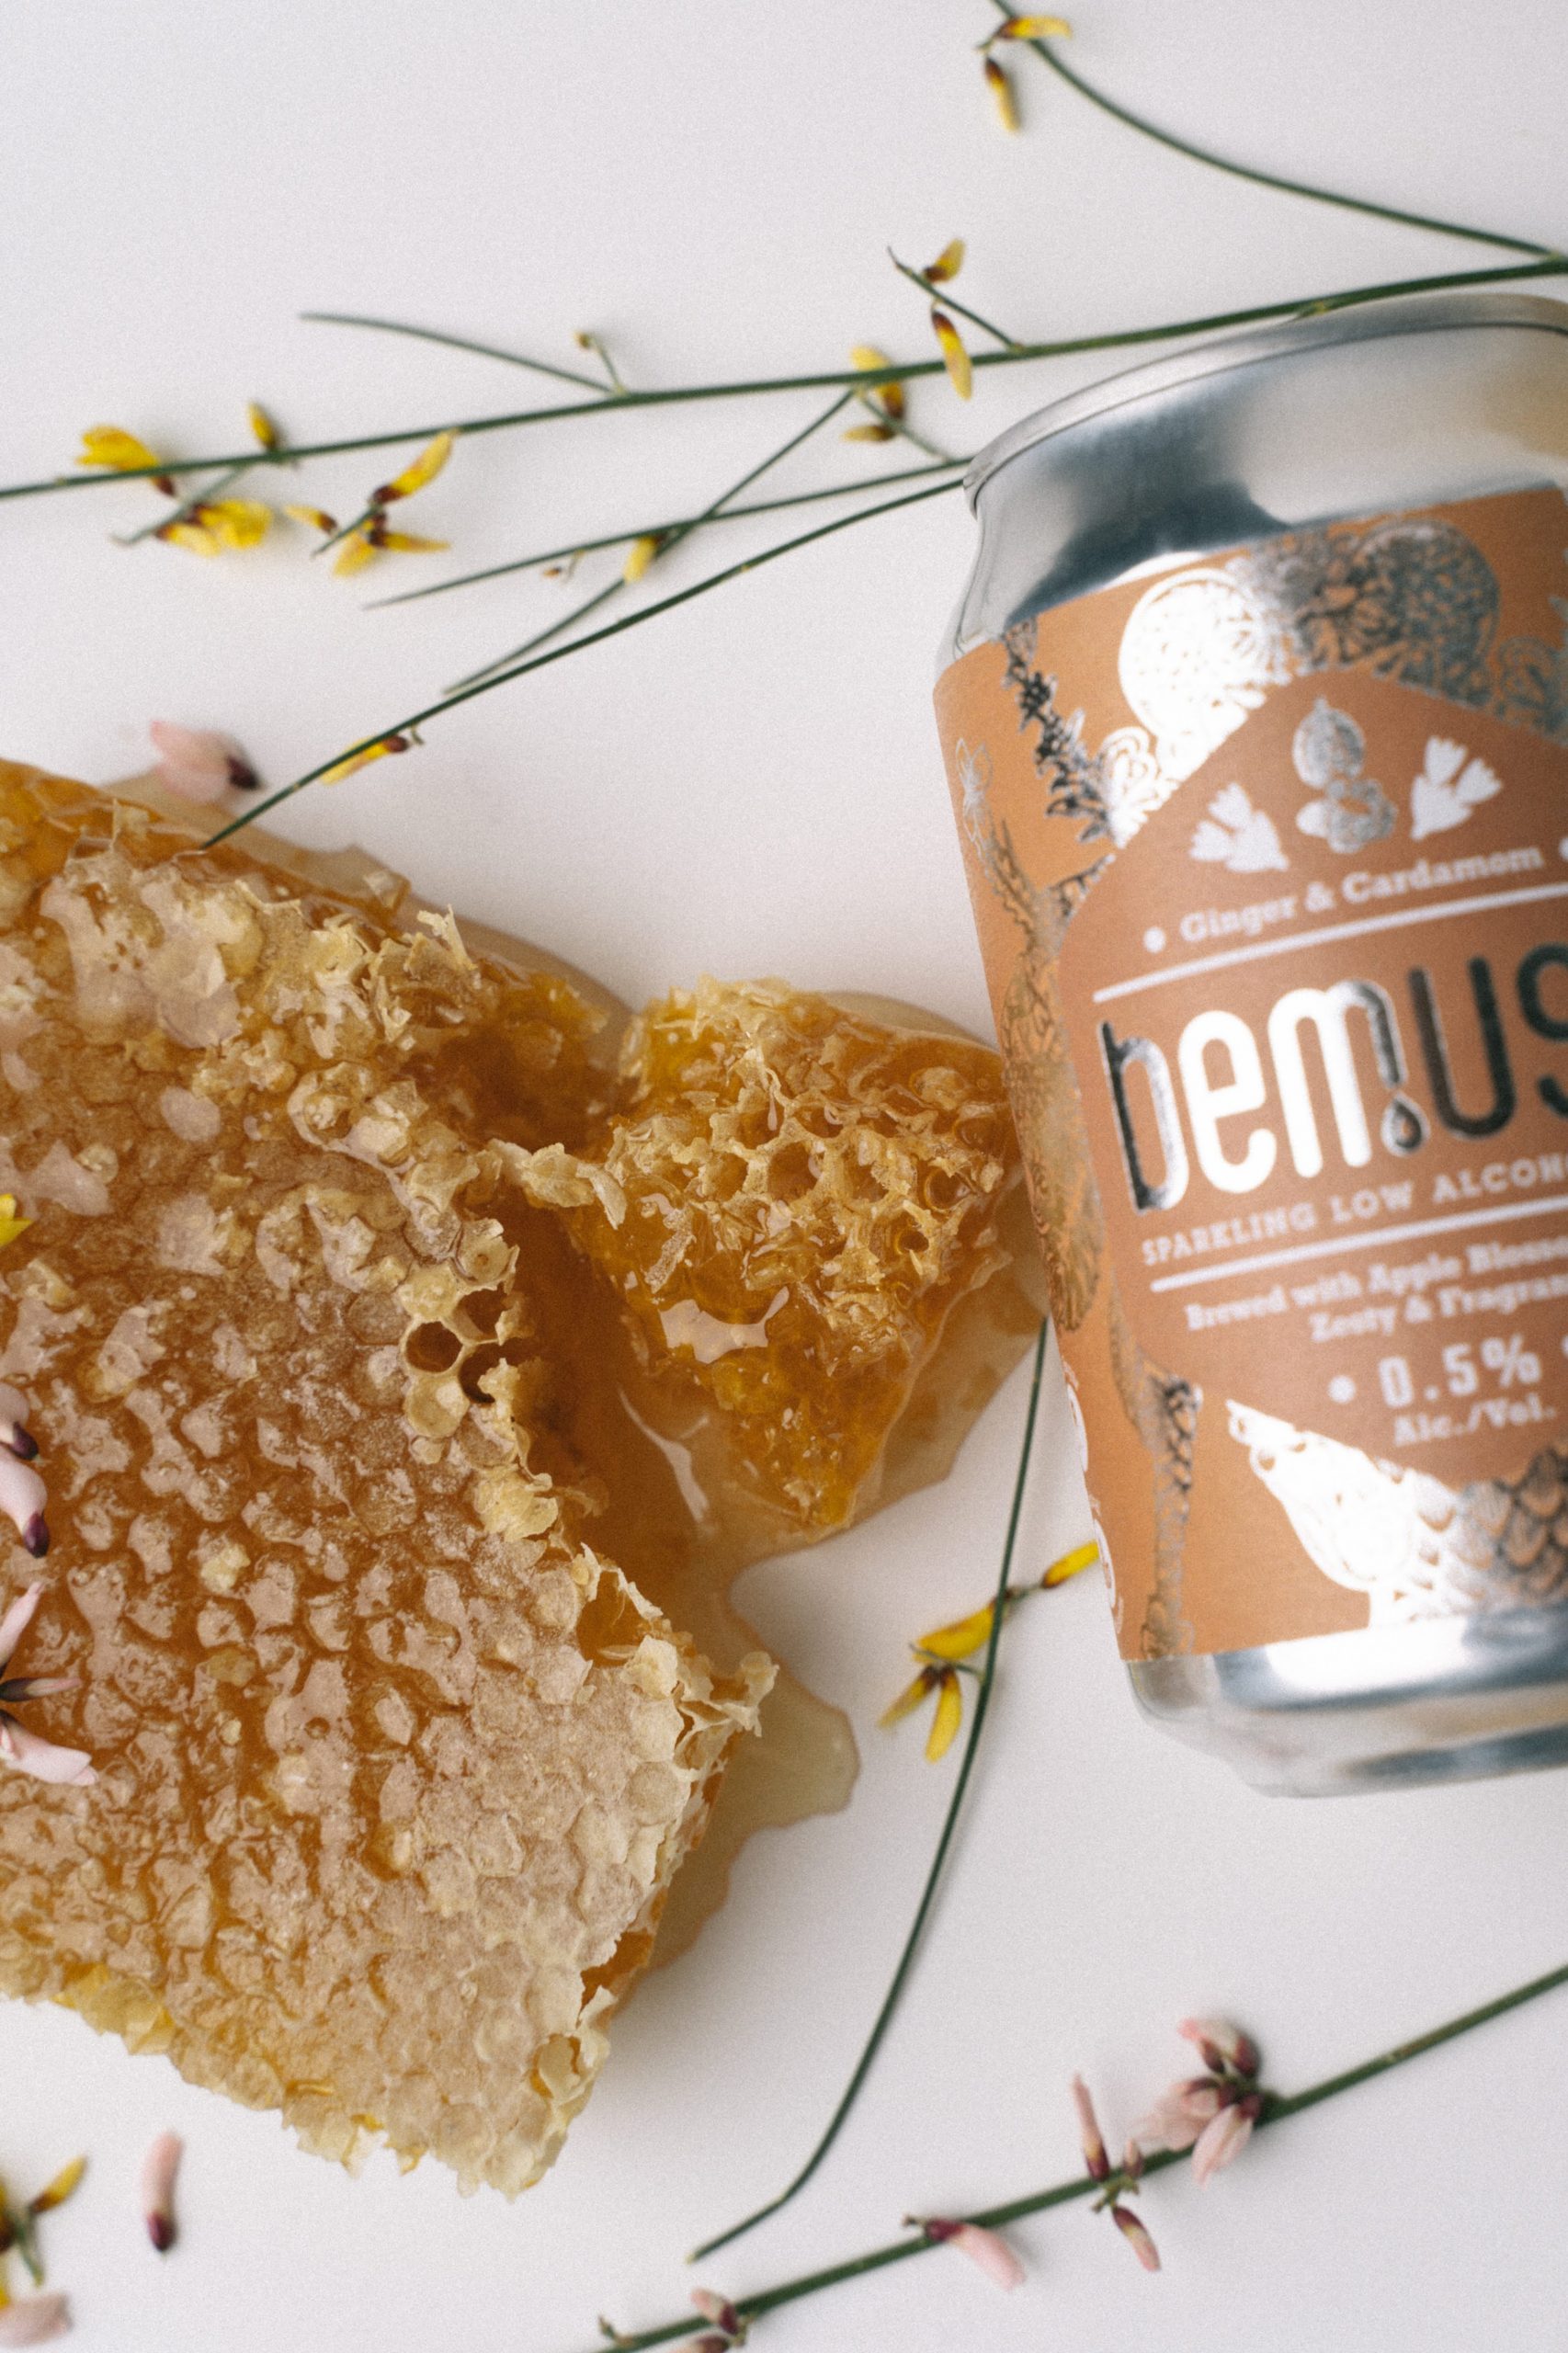 Drinks newcomer Bemuse sees non-alcoholic mead grow more popular